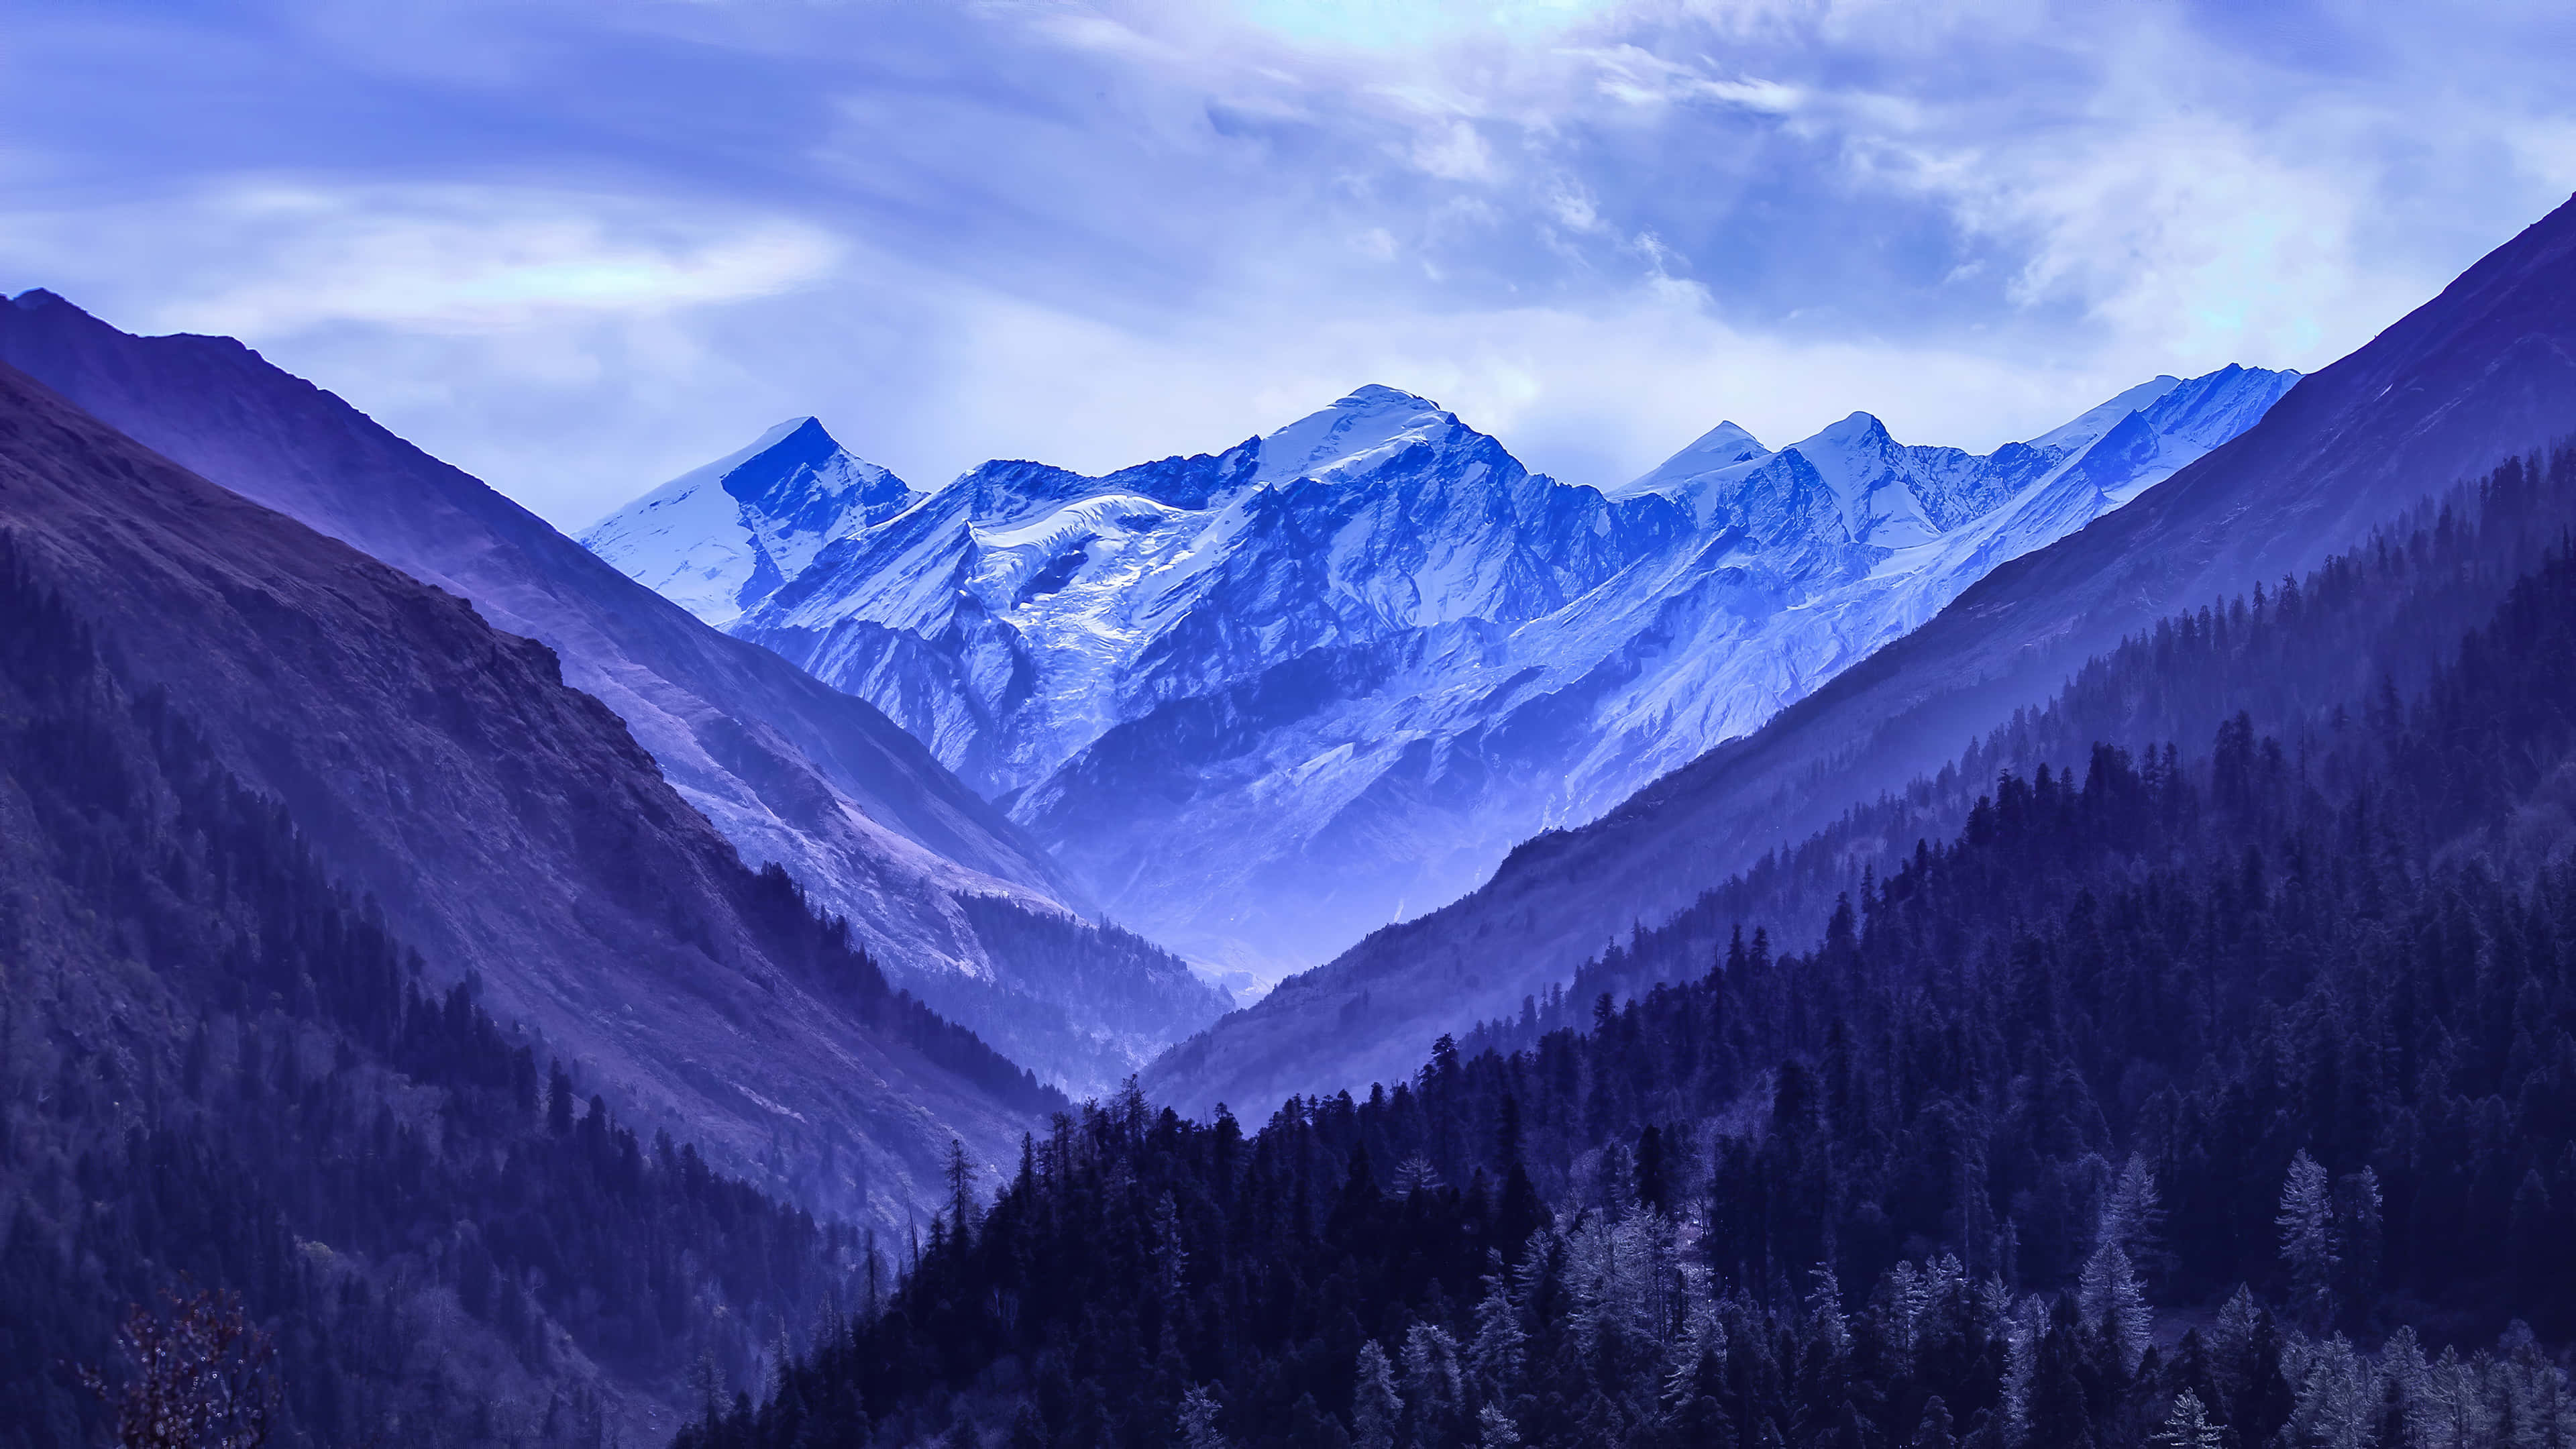 A Mountain Range With Trees And Blue Sky Wallpaper